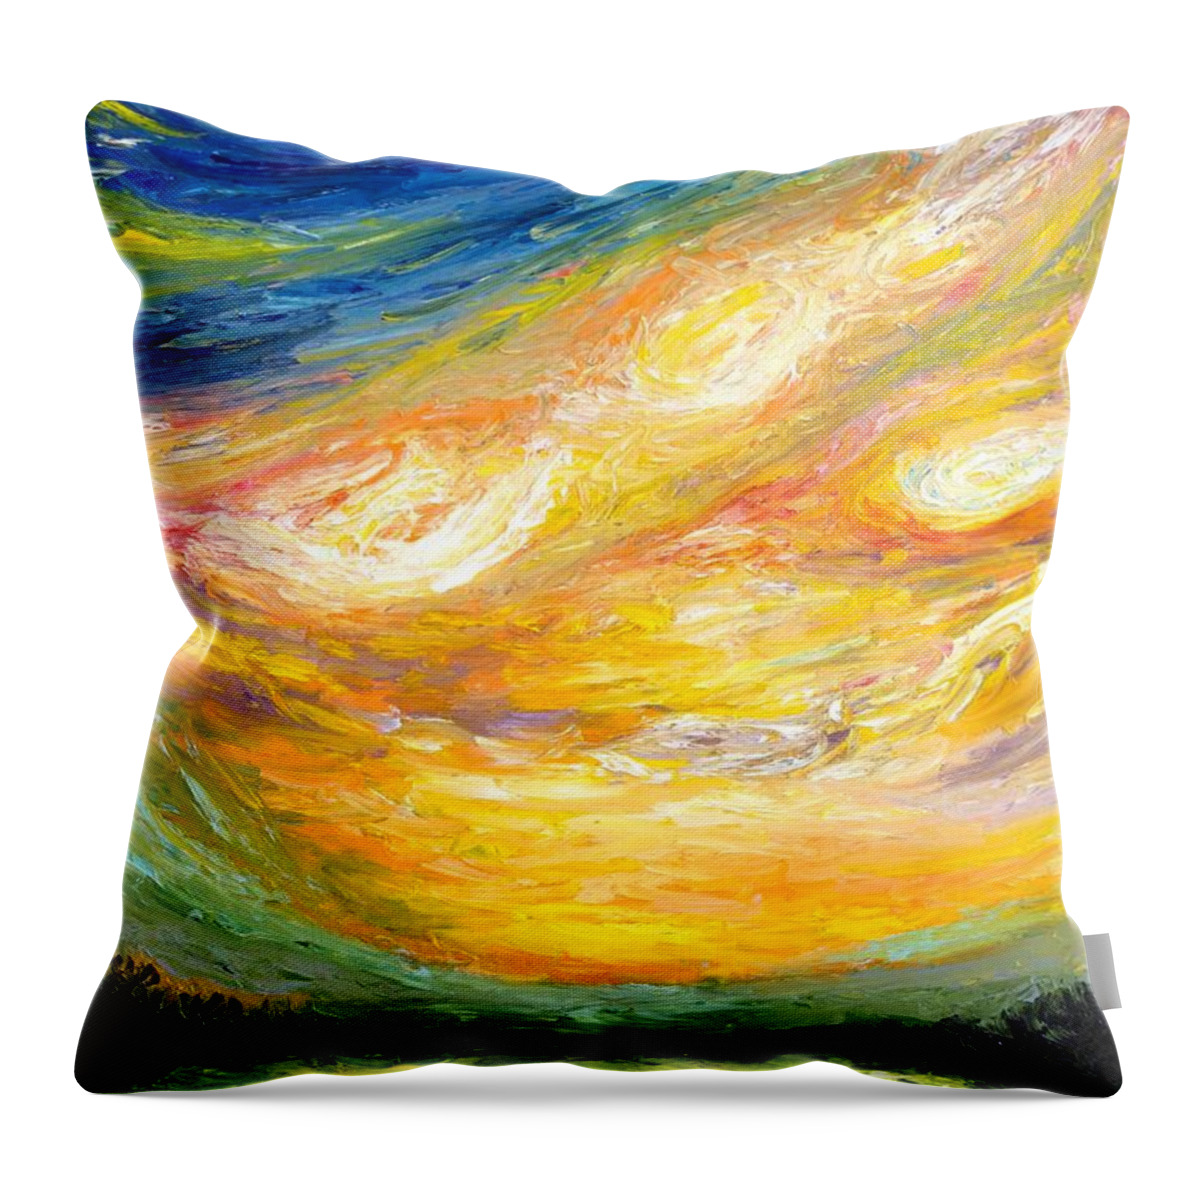 Sunset Throw Pillow featuring the painting Italian Sunset by Chiara Magni